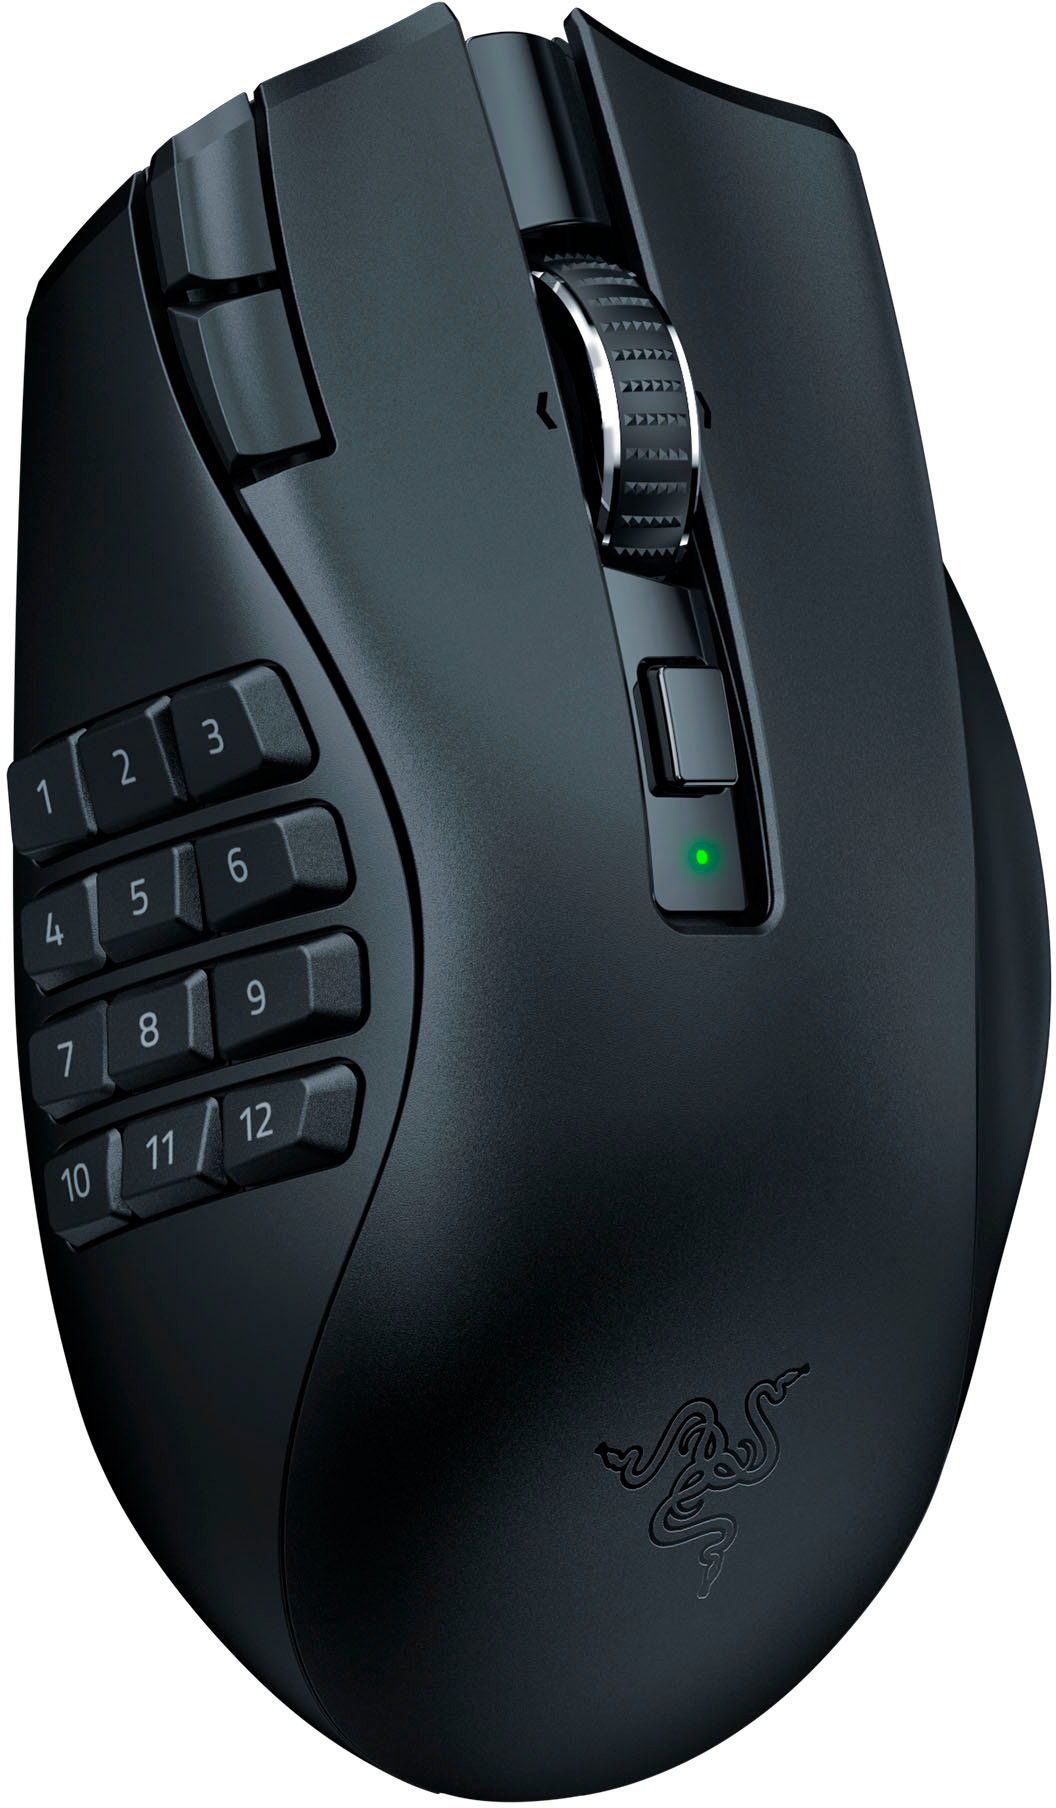 Razer Naga V2 HyperSpeed MMO Wireless Optical Gaming Mouse with 19